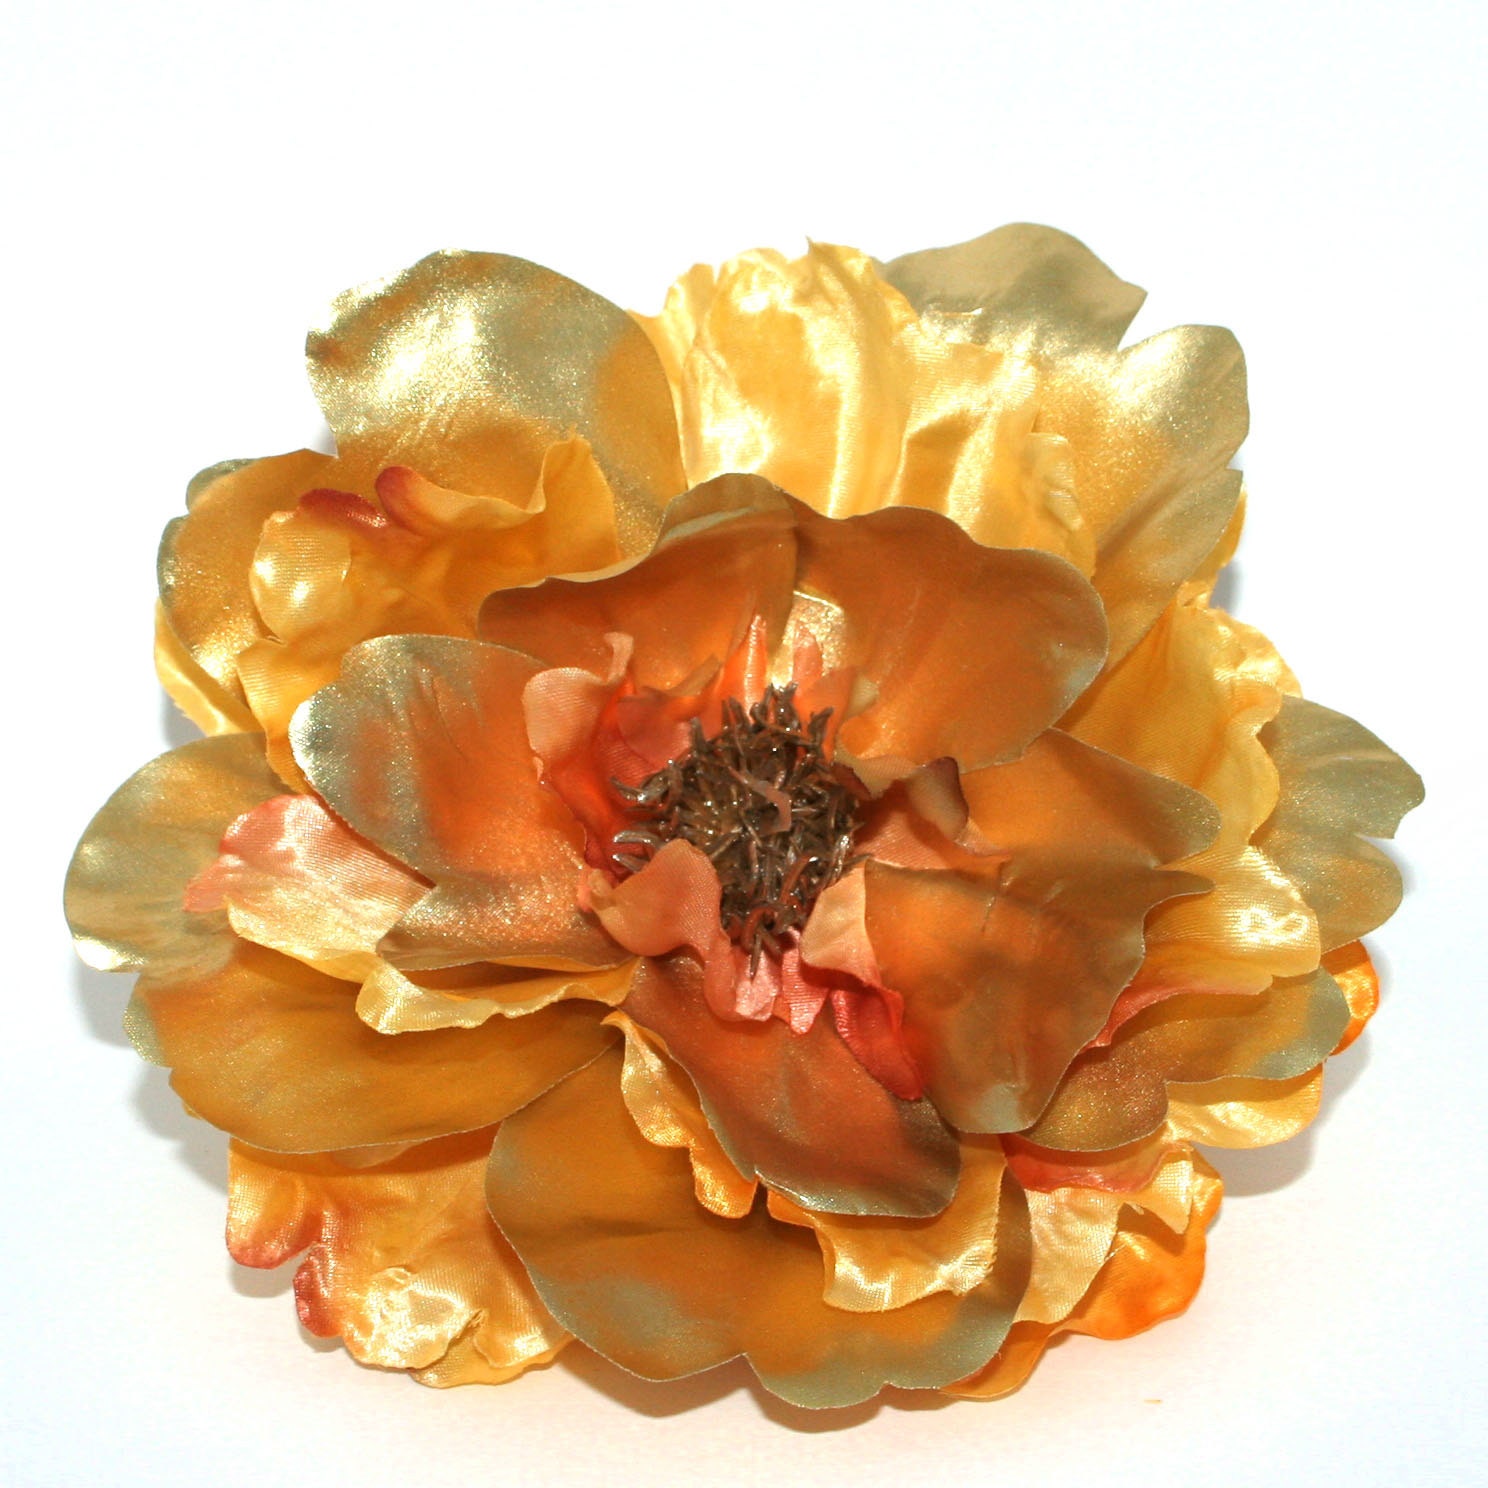 Metallic Yellow Gold Rose - With or Without Stem - Artificial Flowers, Silk  Roses - PRE-ORDER